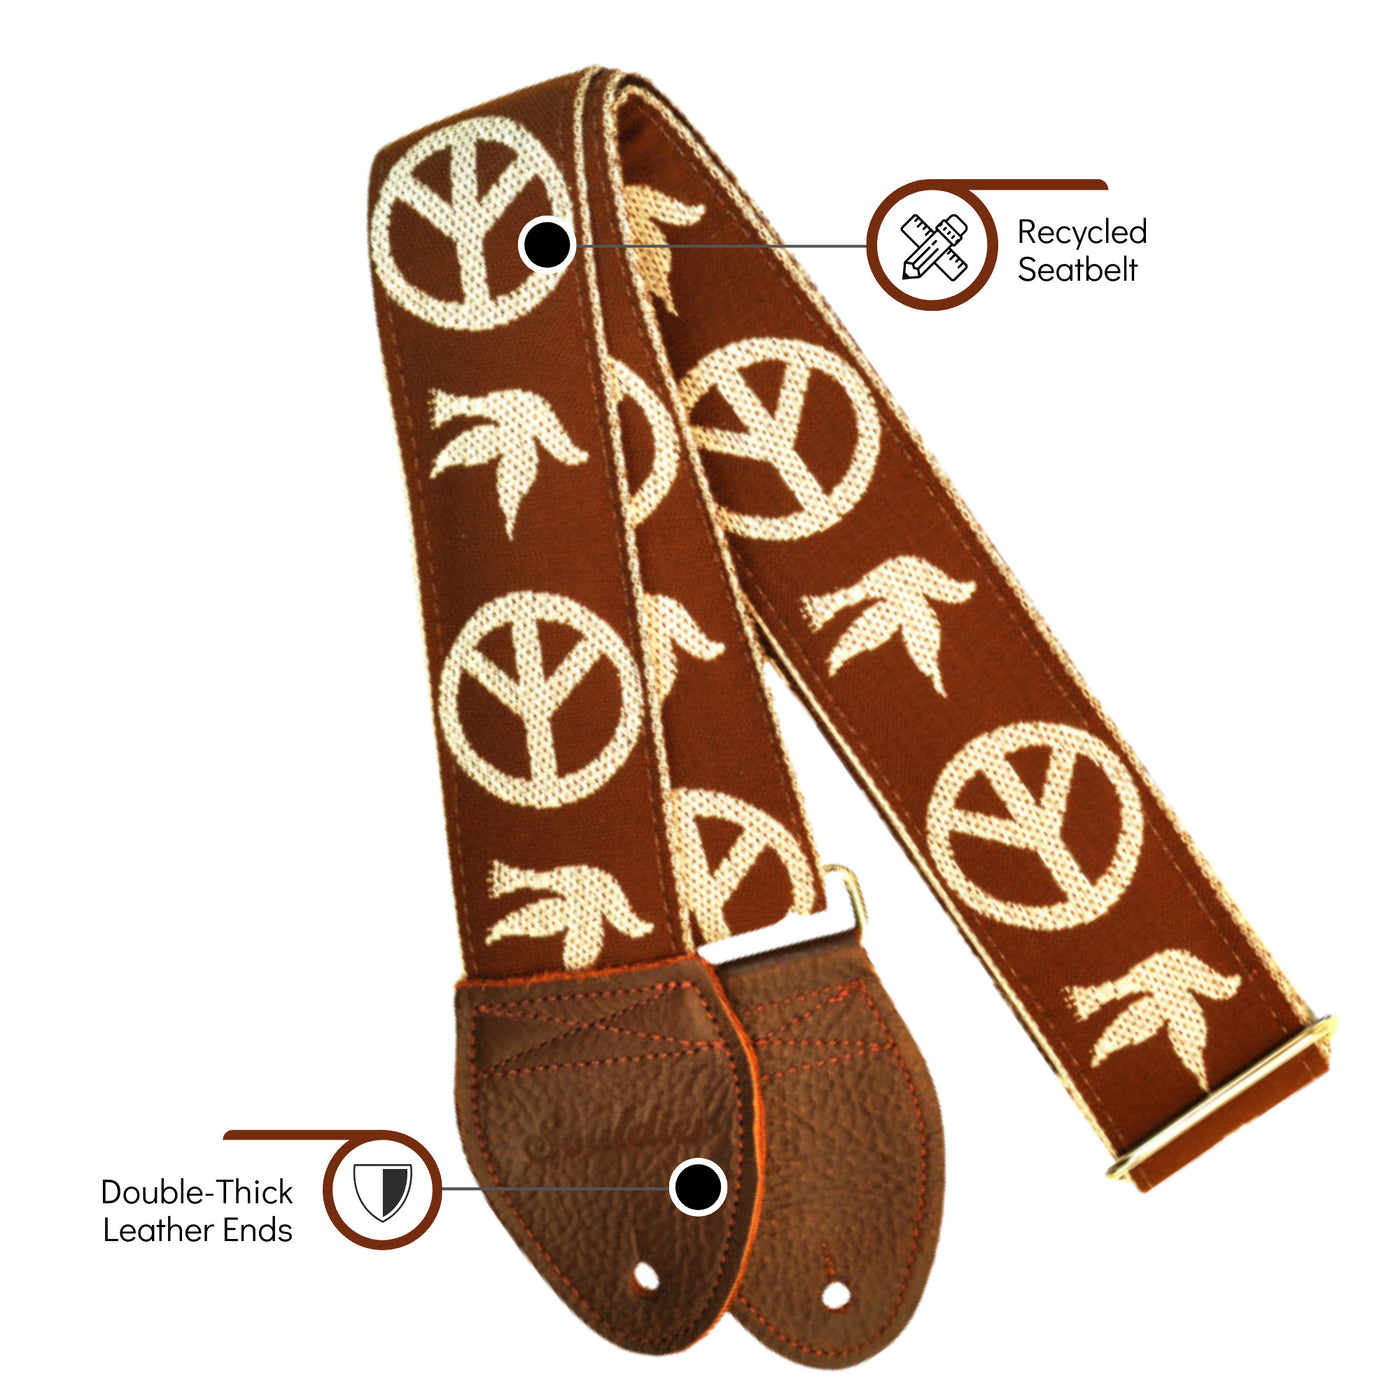 Souldier GS1027BR02WB - Handmade Seatbelt Guitar Strap for Bass, Electric or Acoustic Guitar, 2 Inches Wide and Adjustable Length from 30" to 63"  Made in the USA, Young Peace Dove, Brown